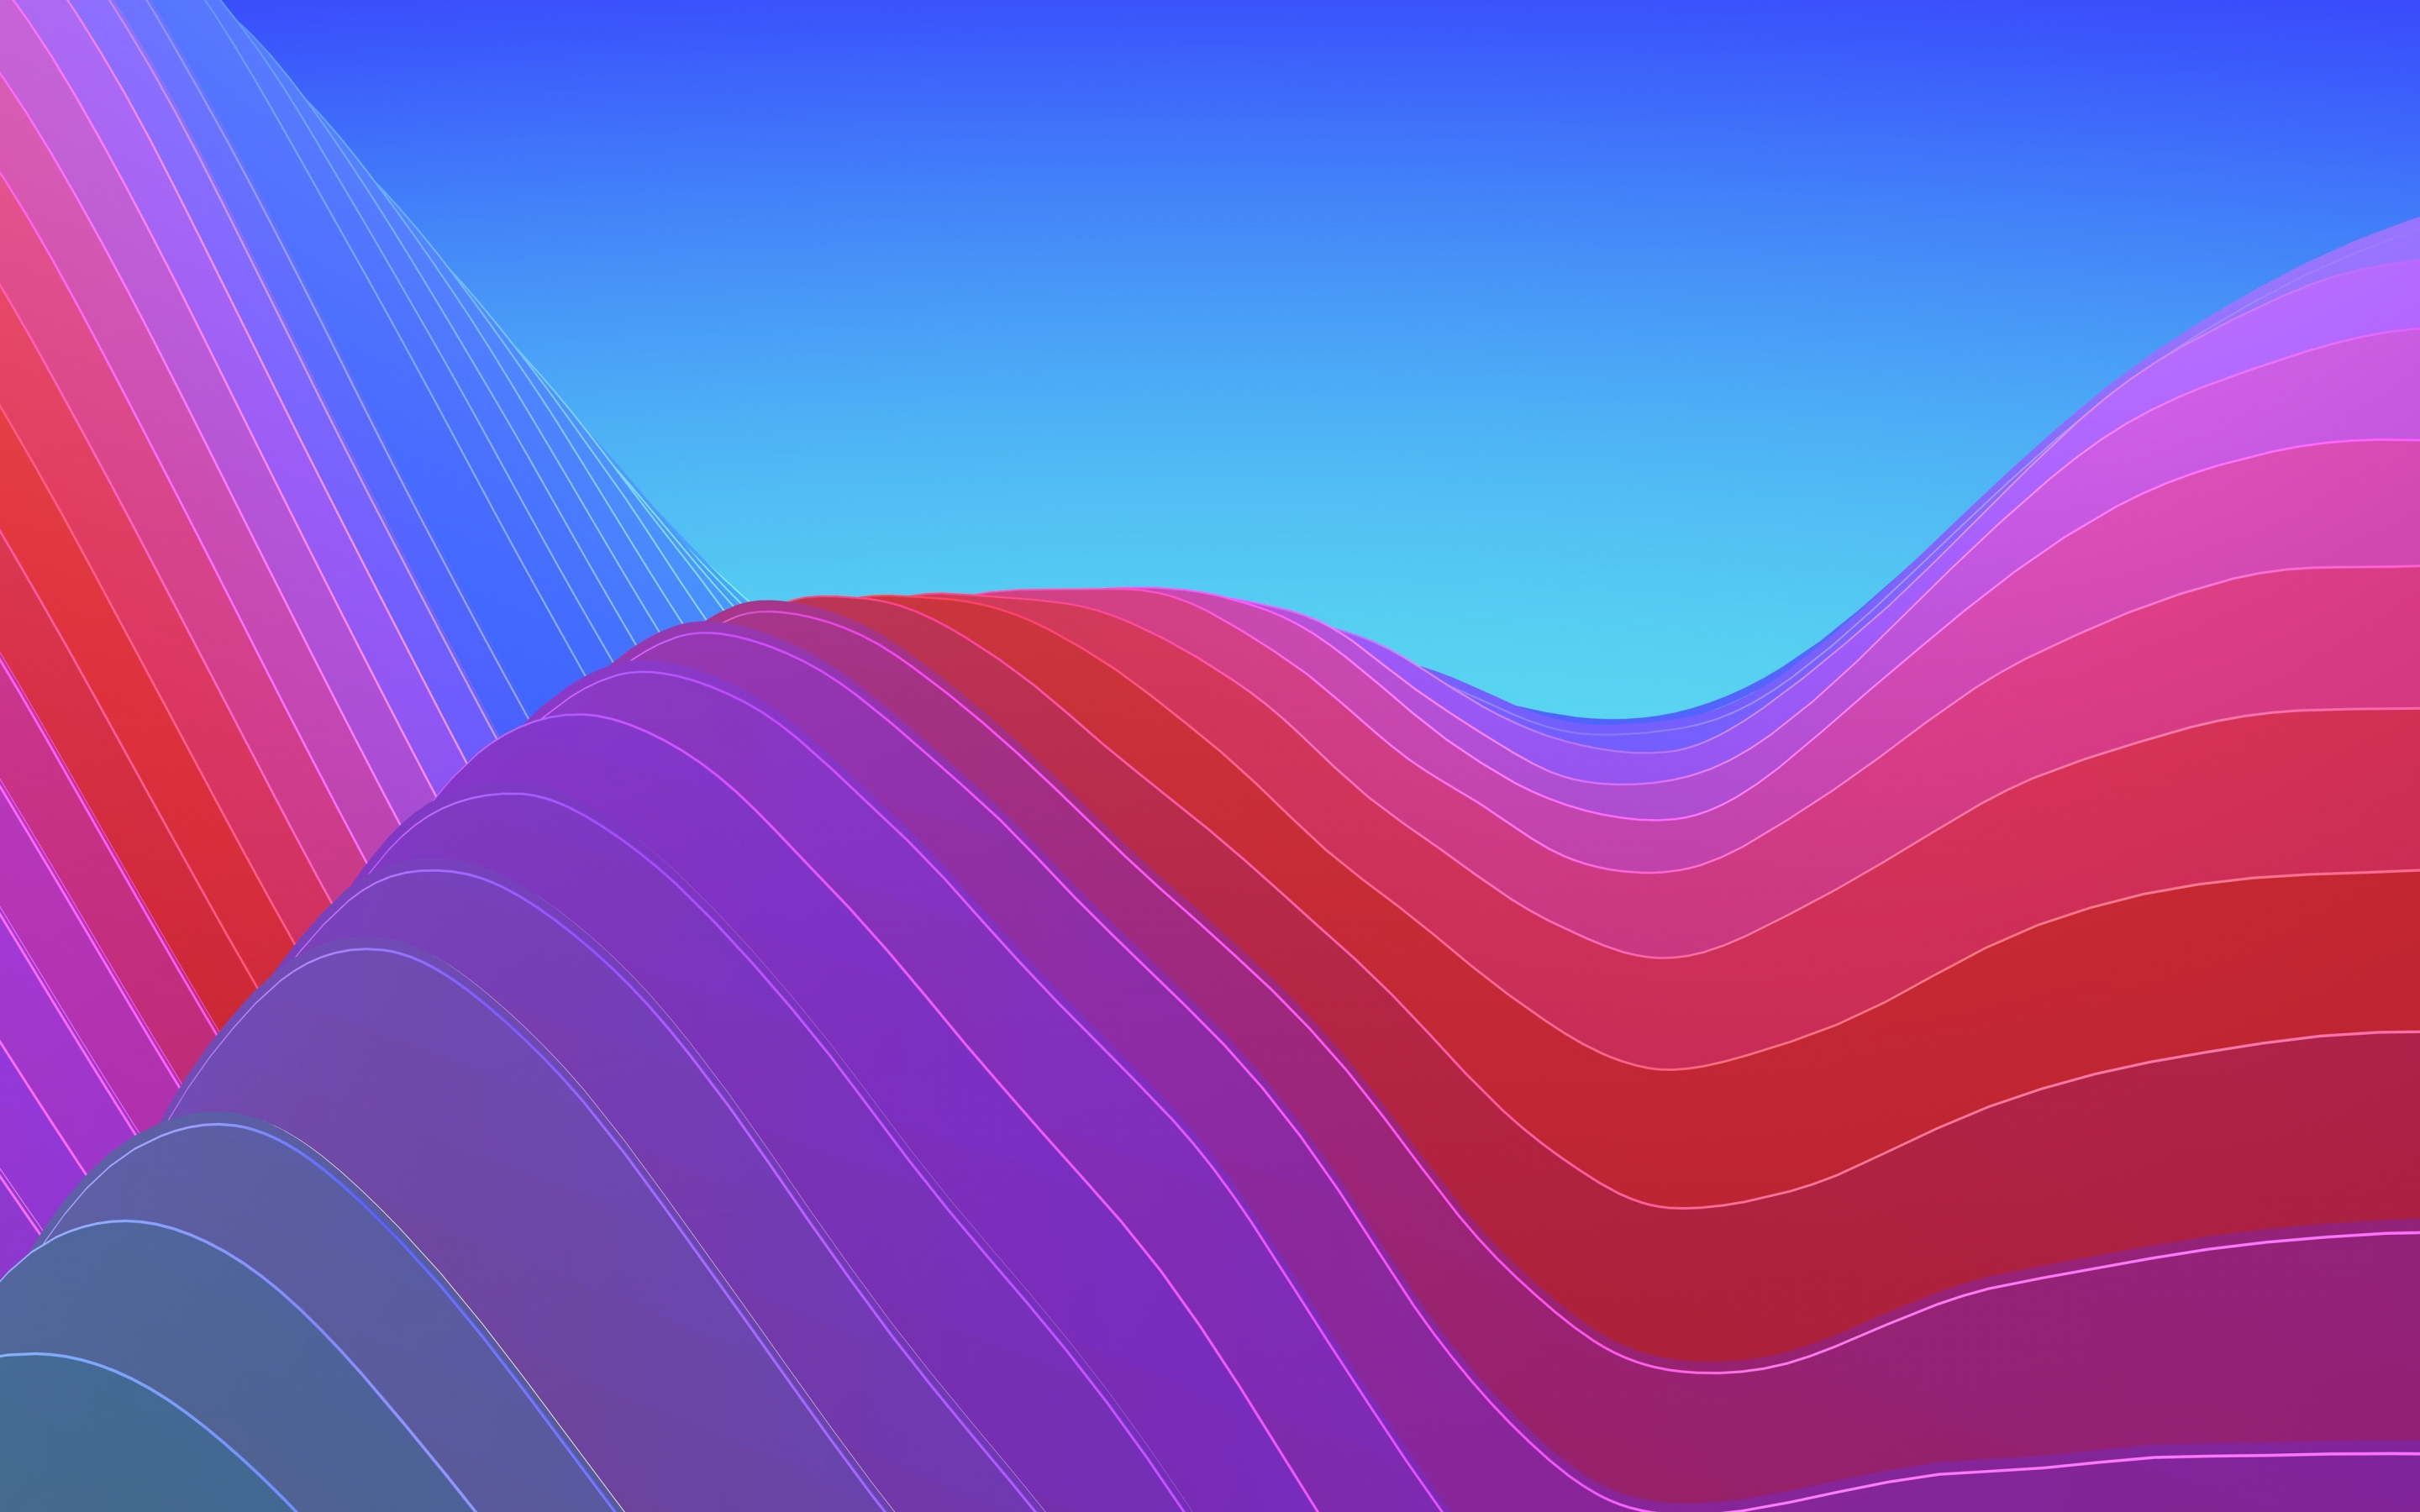 Waves, abstract, gradient, iOS 11, colorful, iPhone x, stock, 2880x1800 wallpaper